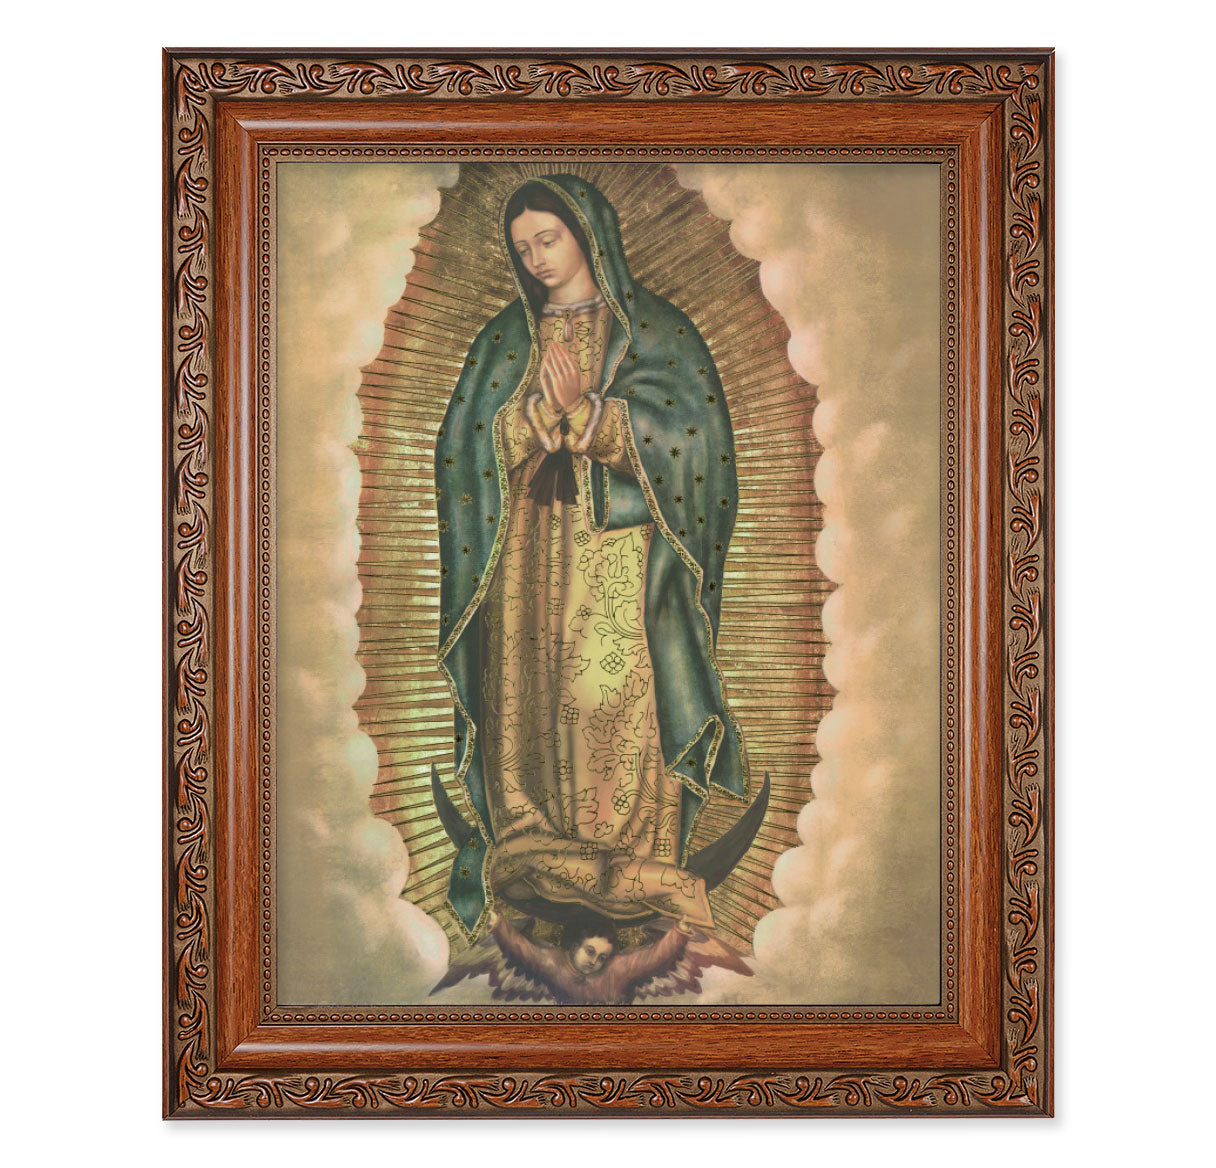 10"x 12" Our Lady of Guadalupe Mahogany Finished Framed Art